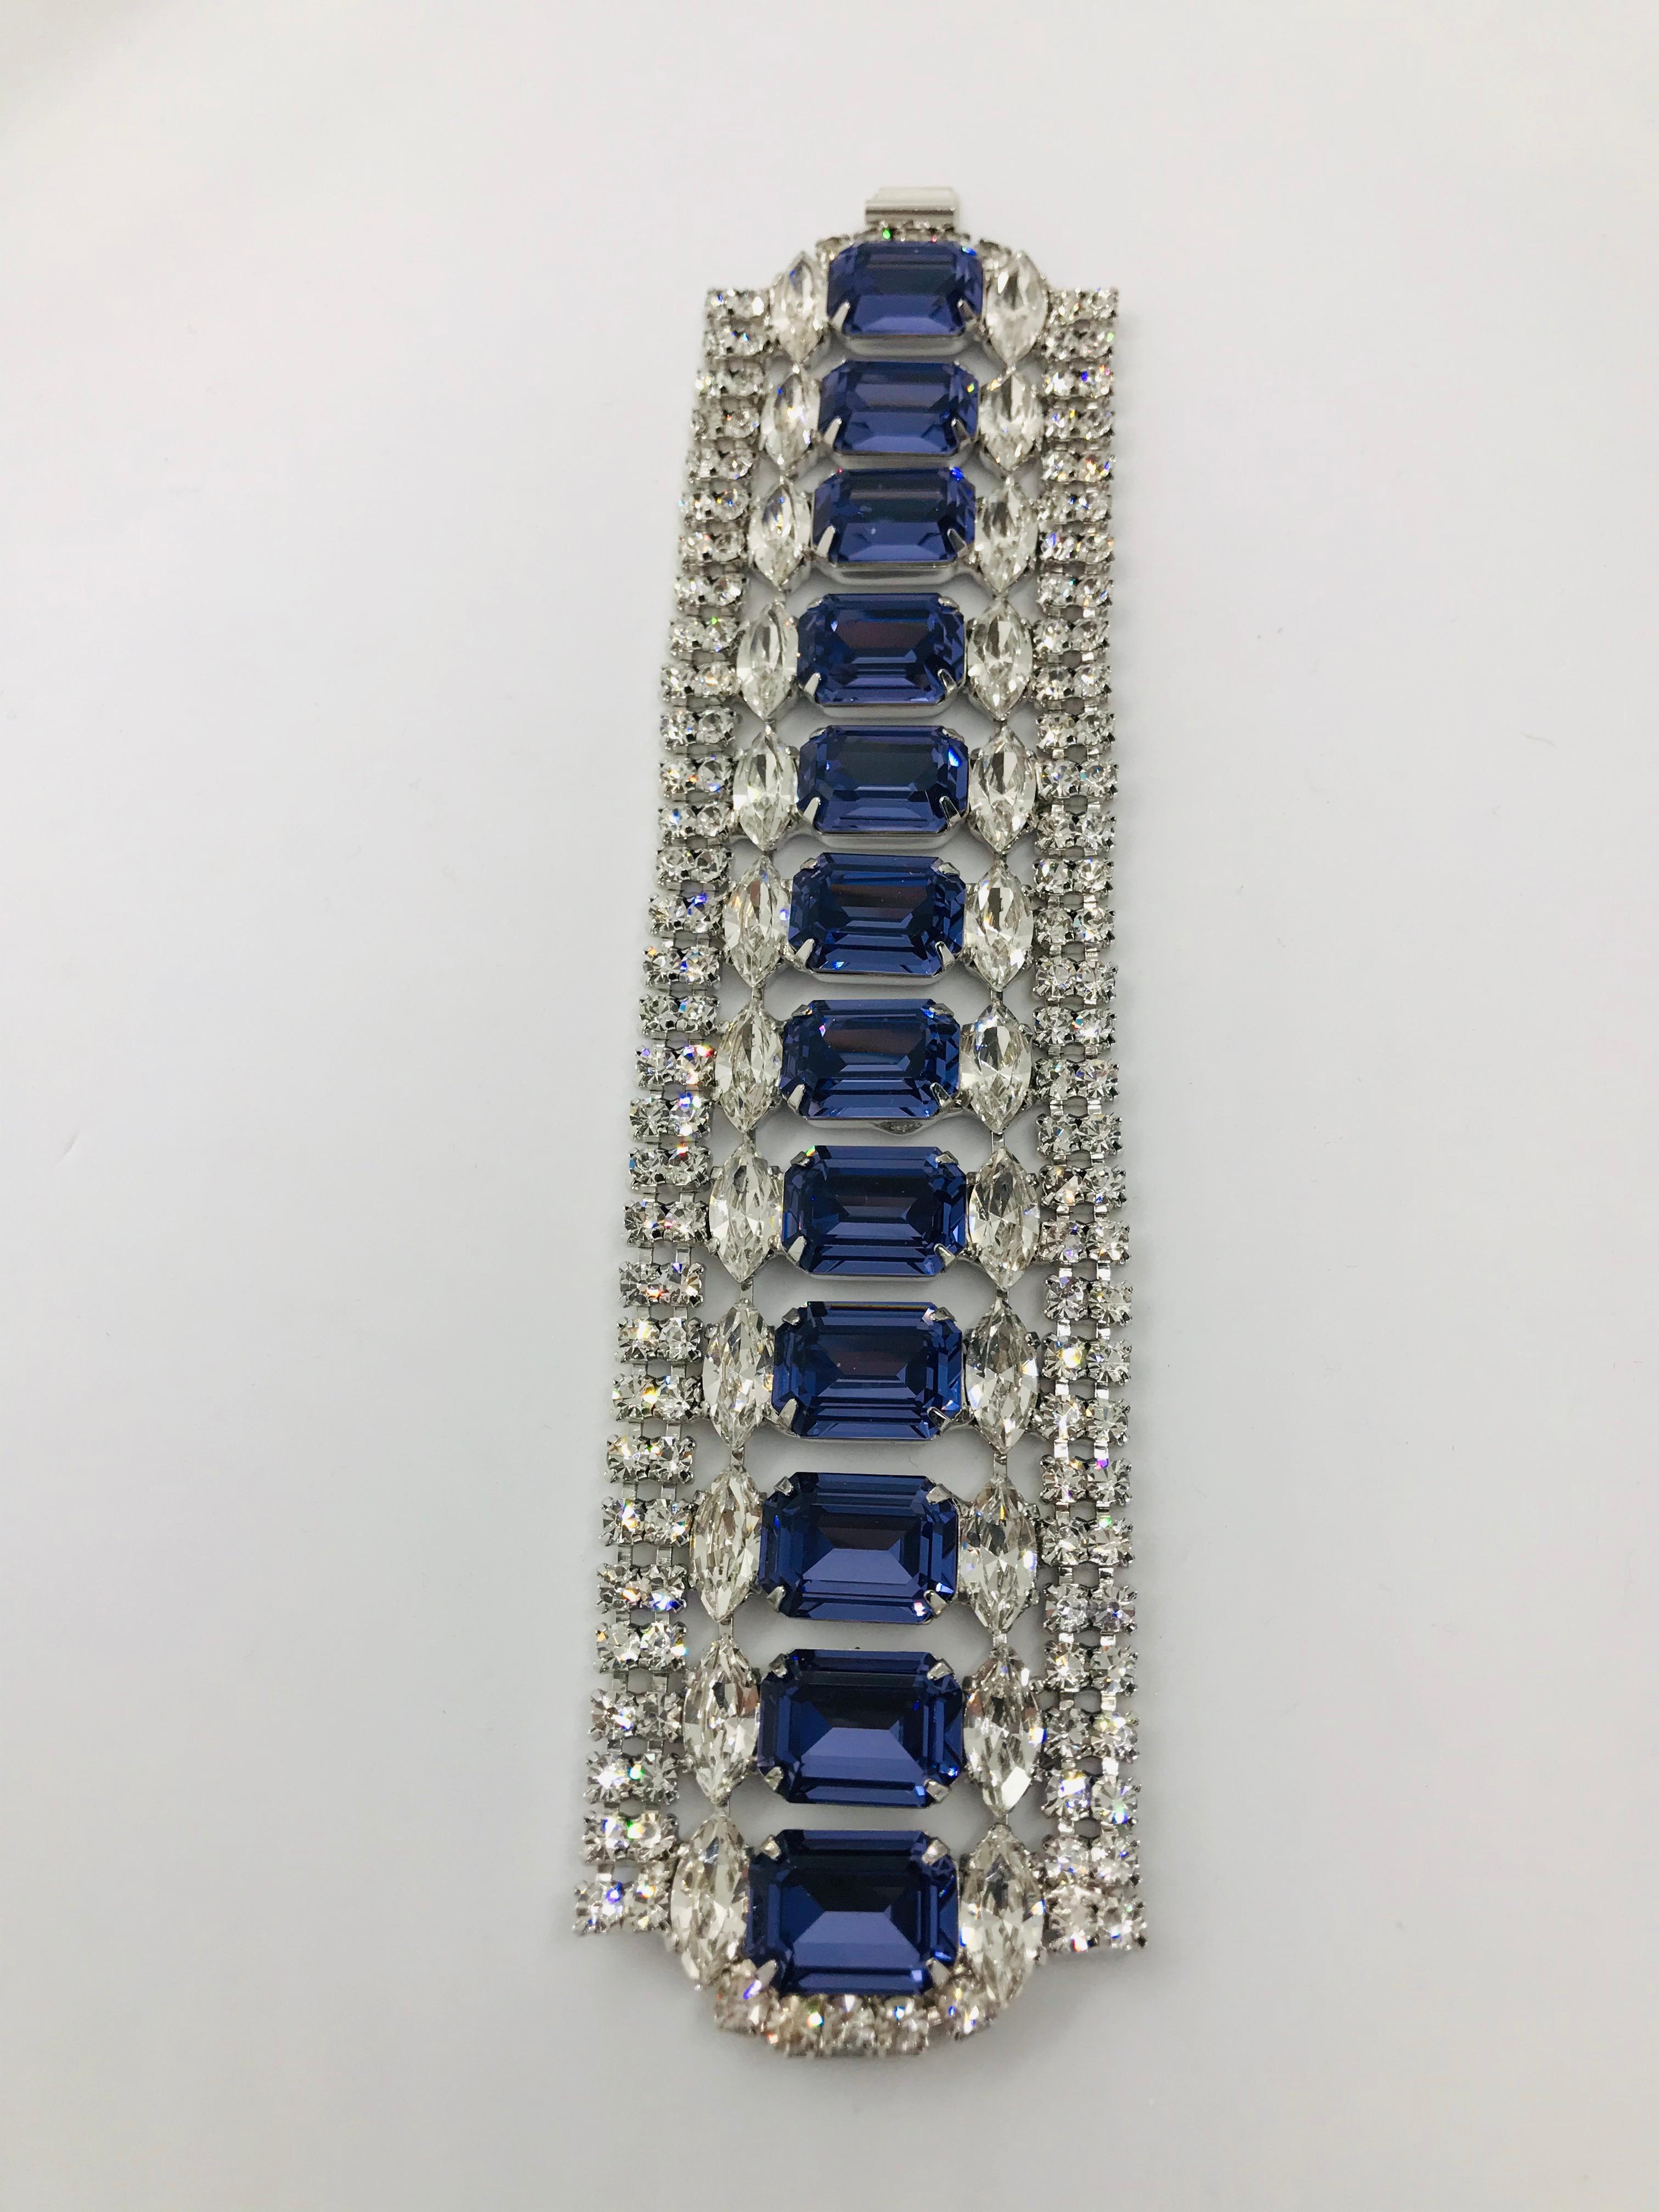 Our Swarovski tanzanite and vintage Austrian crystal flex cuff bracelet looks like it has just stepped out of a Hollywood movie!  Feel like a movie star in this glamorous flex bracelet that features a row of Swarovski tanzanite octagons surrounded